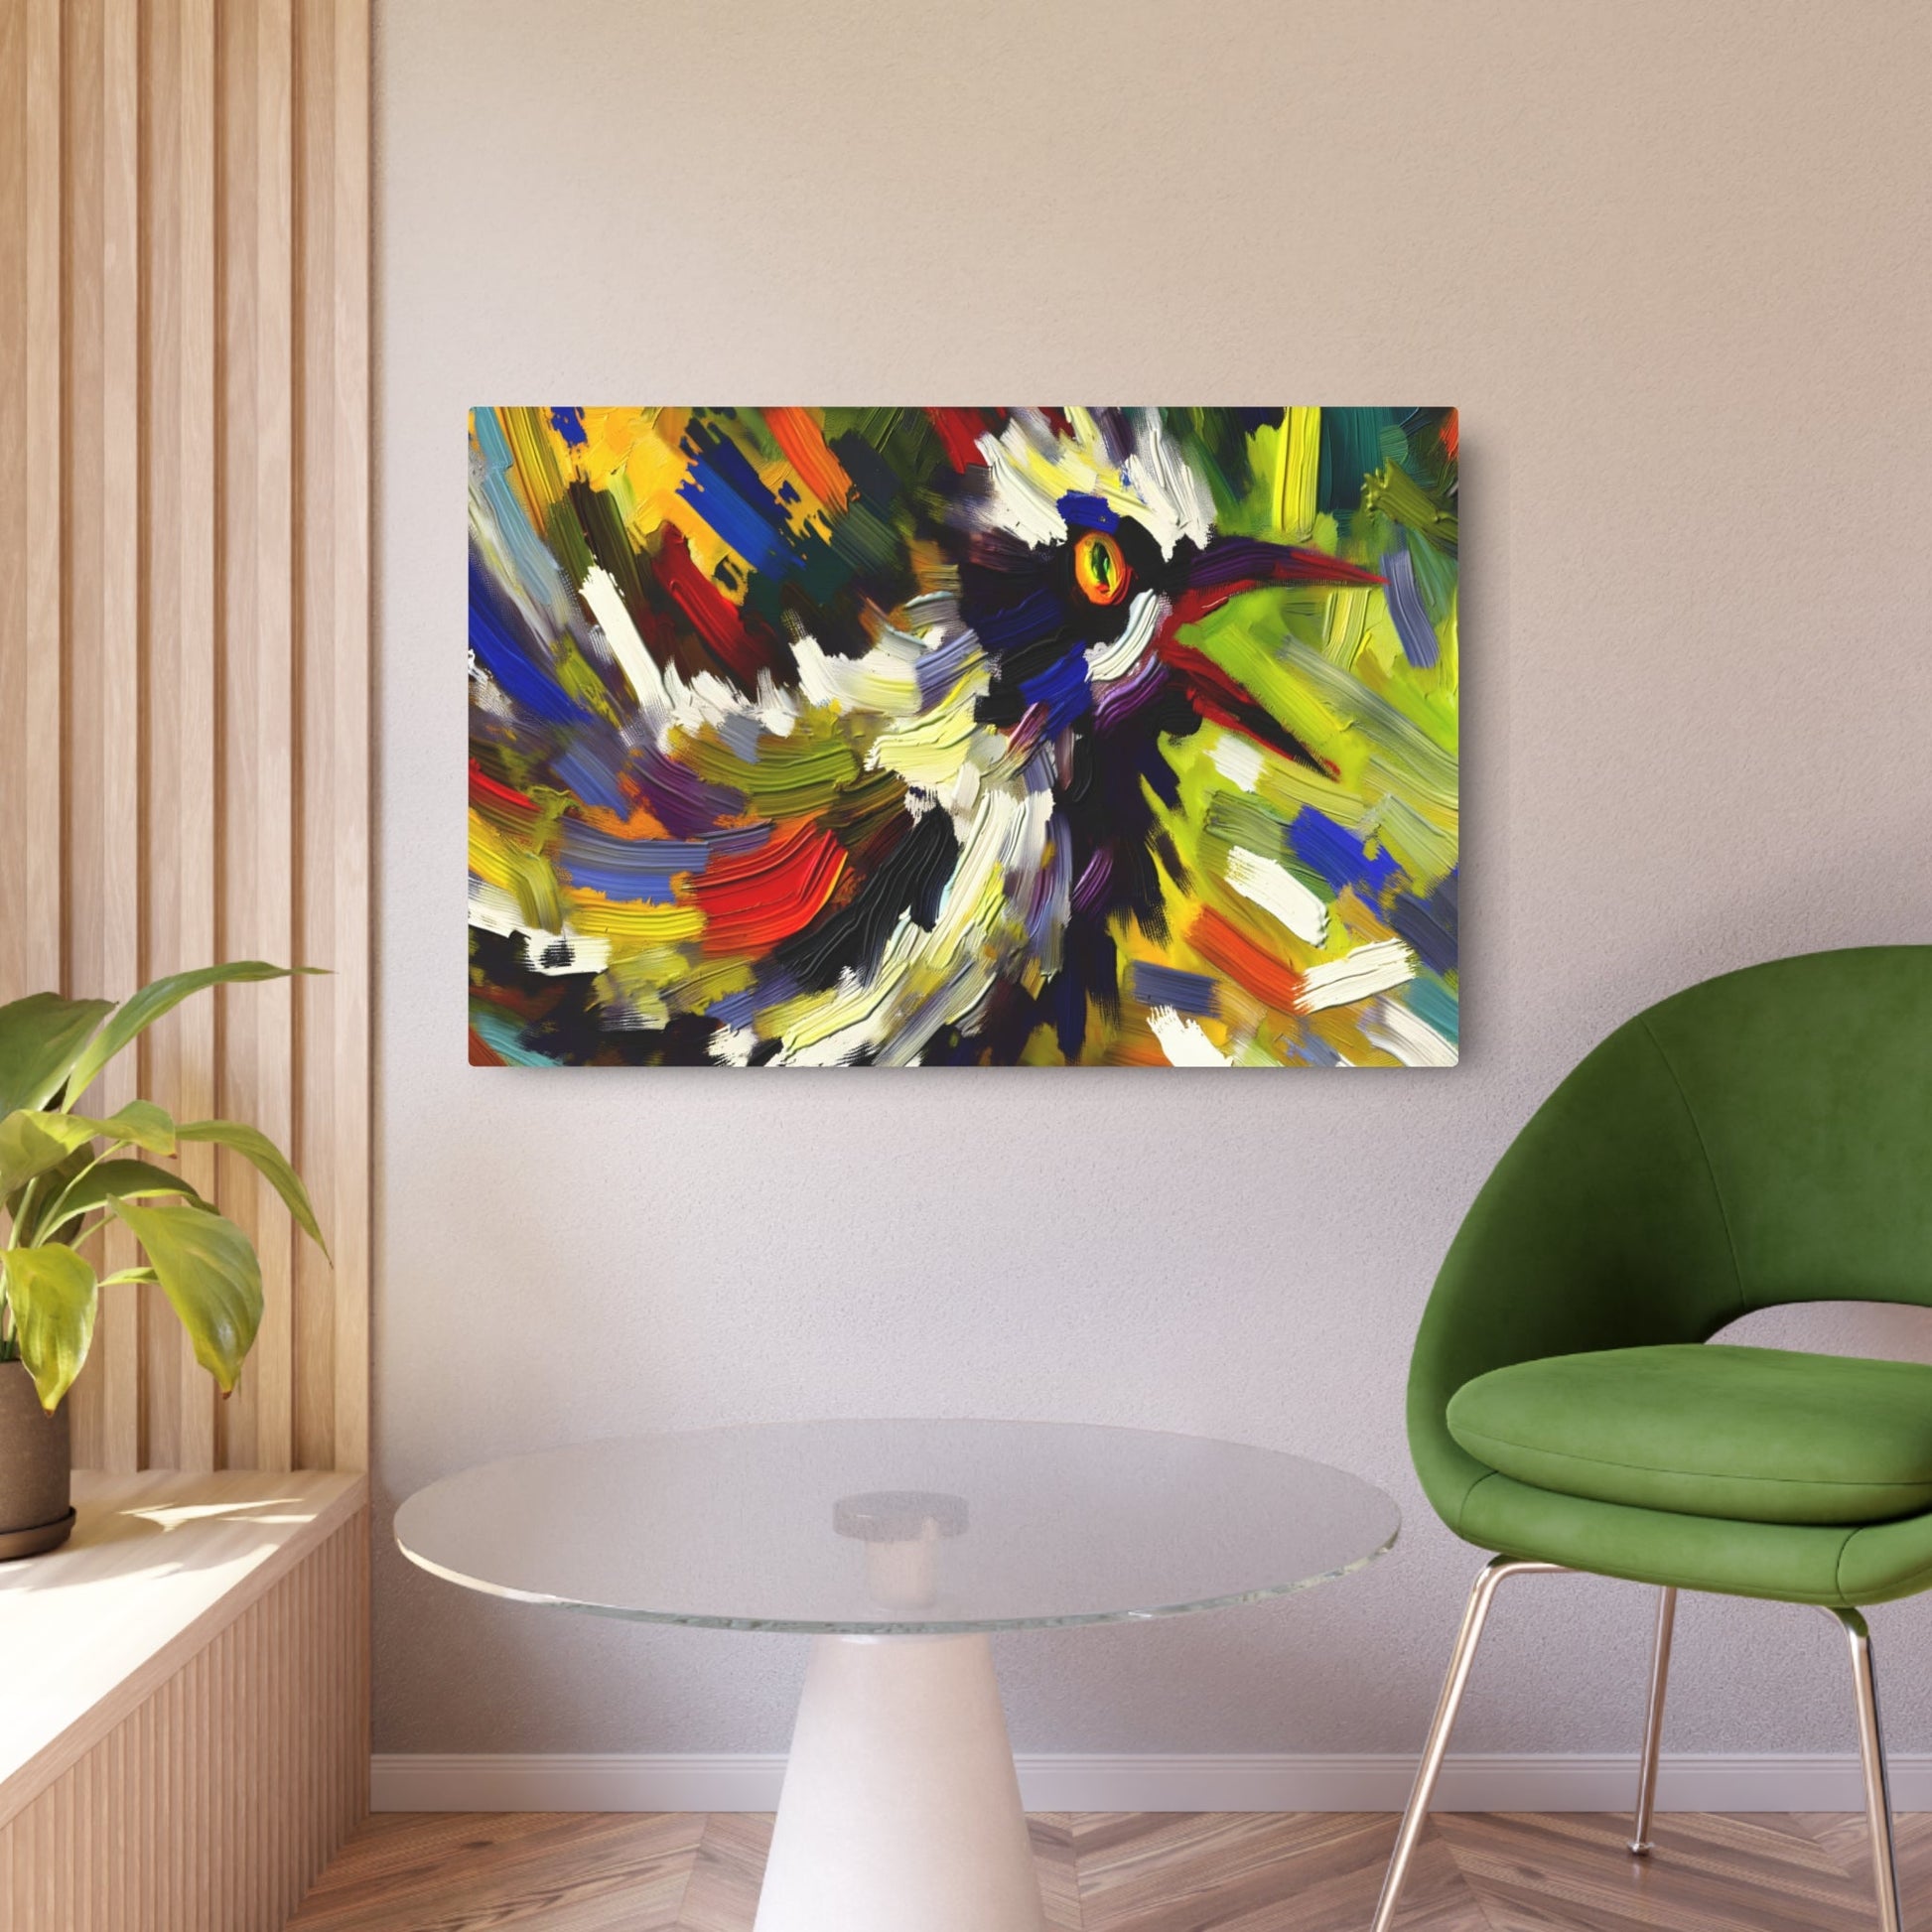 Metal Poster Art | "Vibrant Abstract Expressionism Art - Modern Contemporary Style Bird Painting with Emotional Brush Strokes" - Metal Poster Art 36″ x 24″ (Horizontal) 0.12''